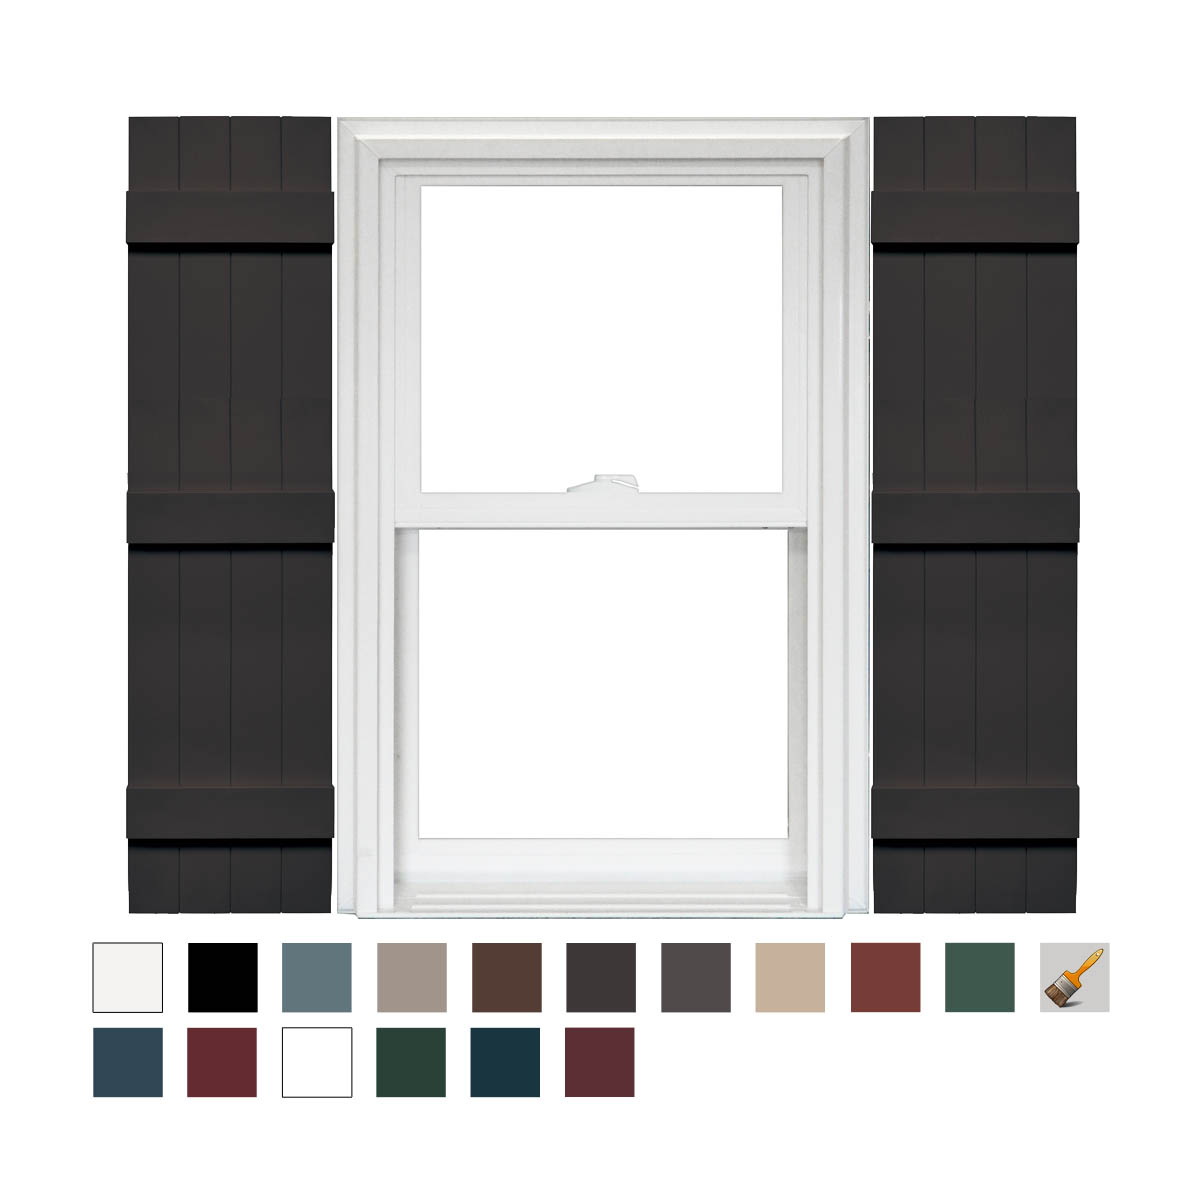 Mid America Board and Batten Joined Vinyl Shutters (1 Pair)